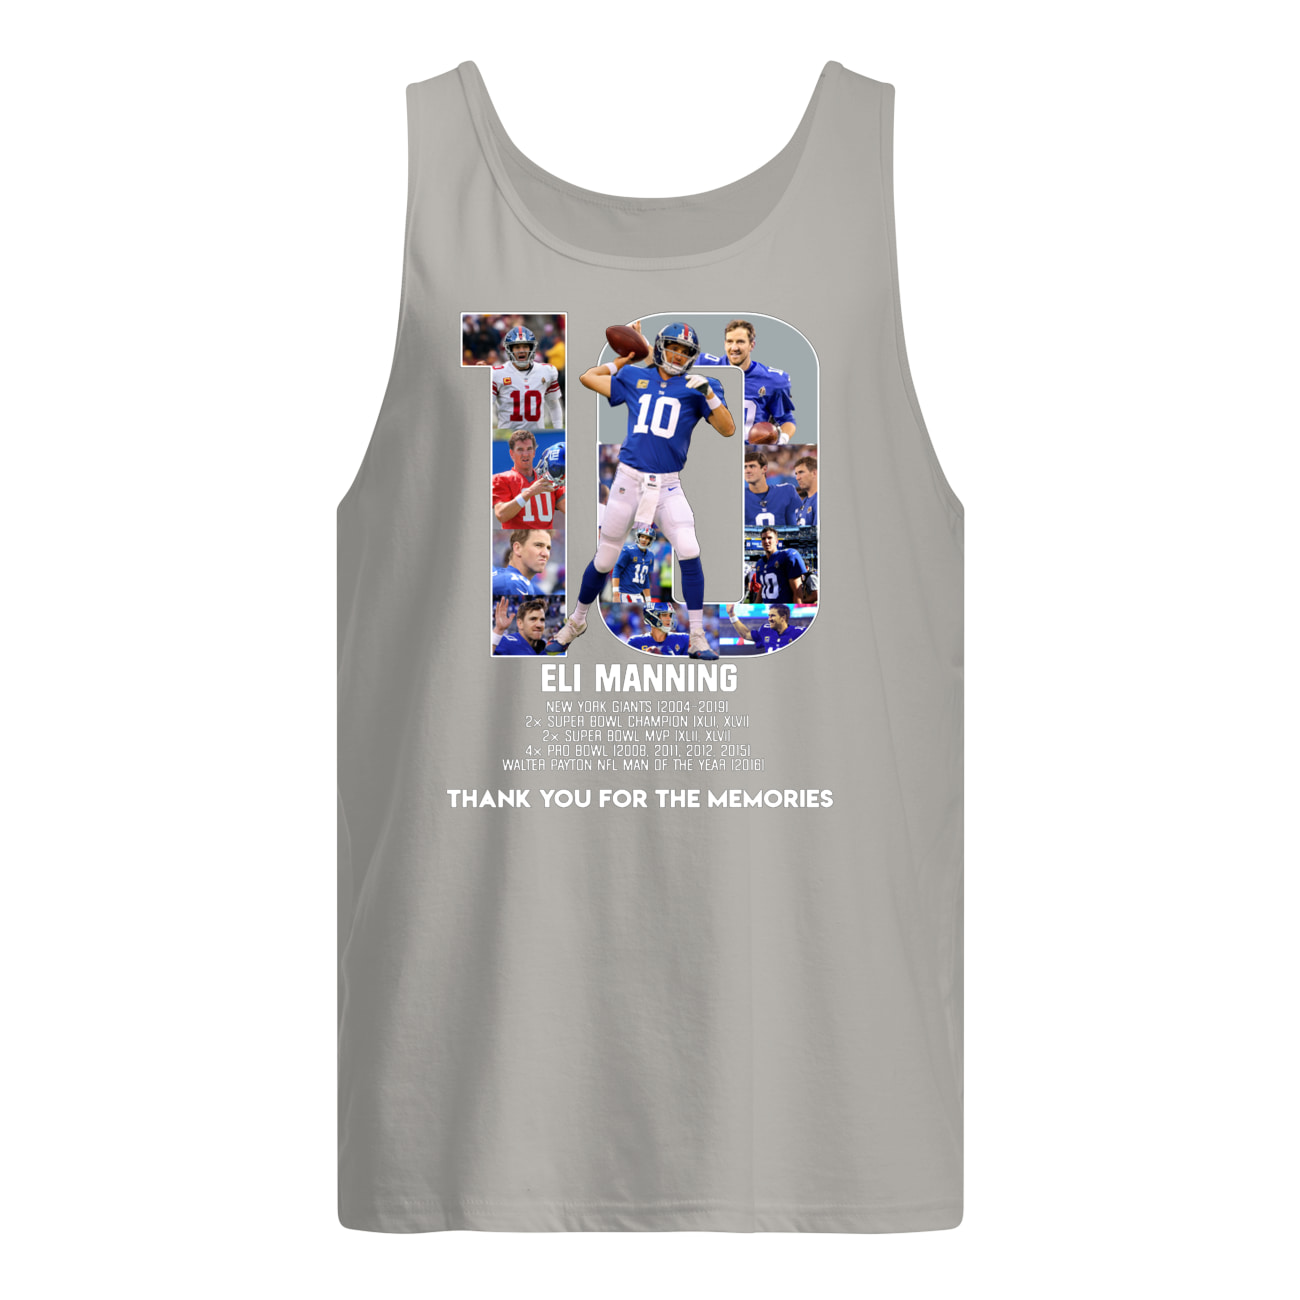 Eli manning 10 new york giants thank for the memories tank top